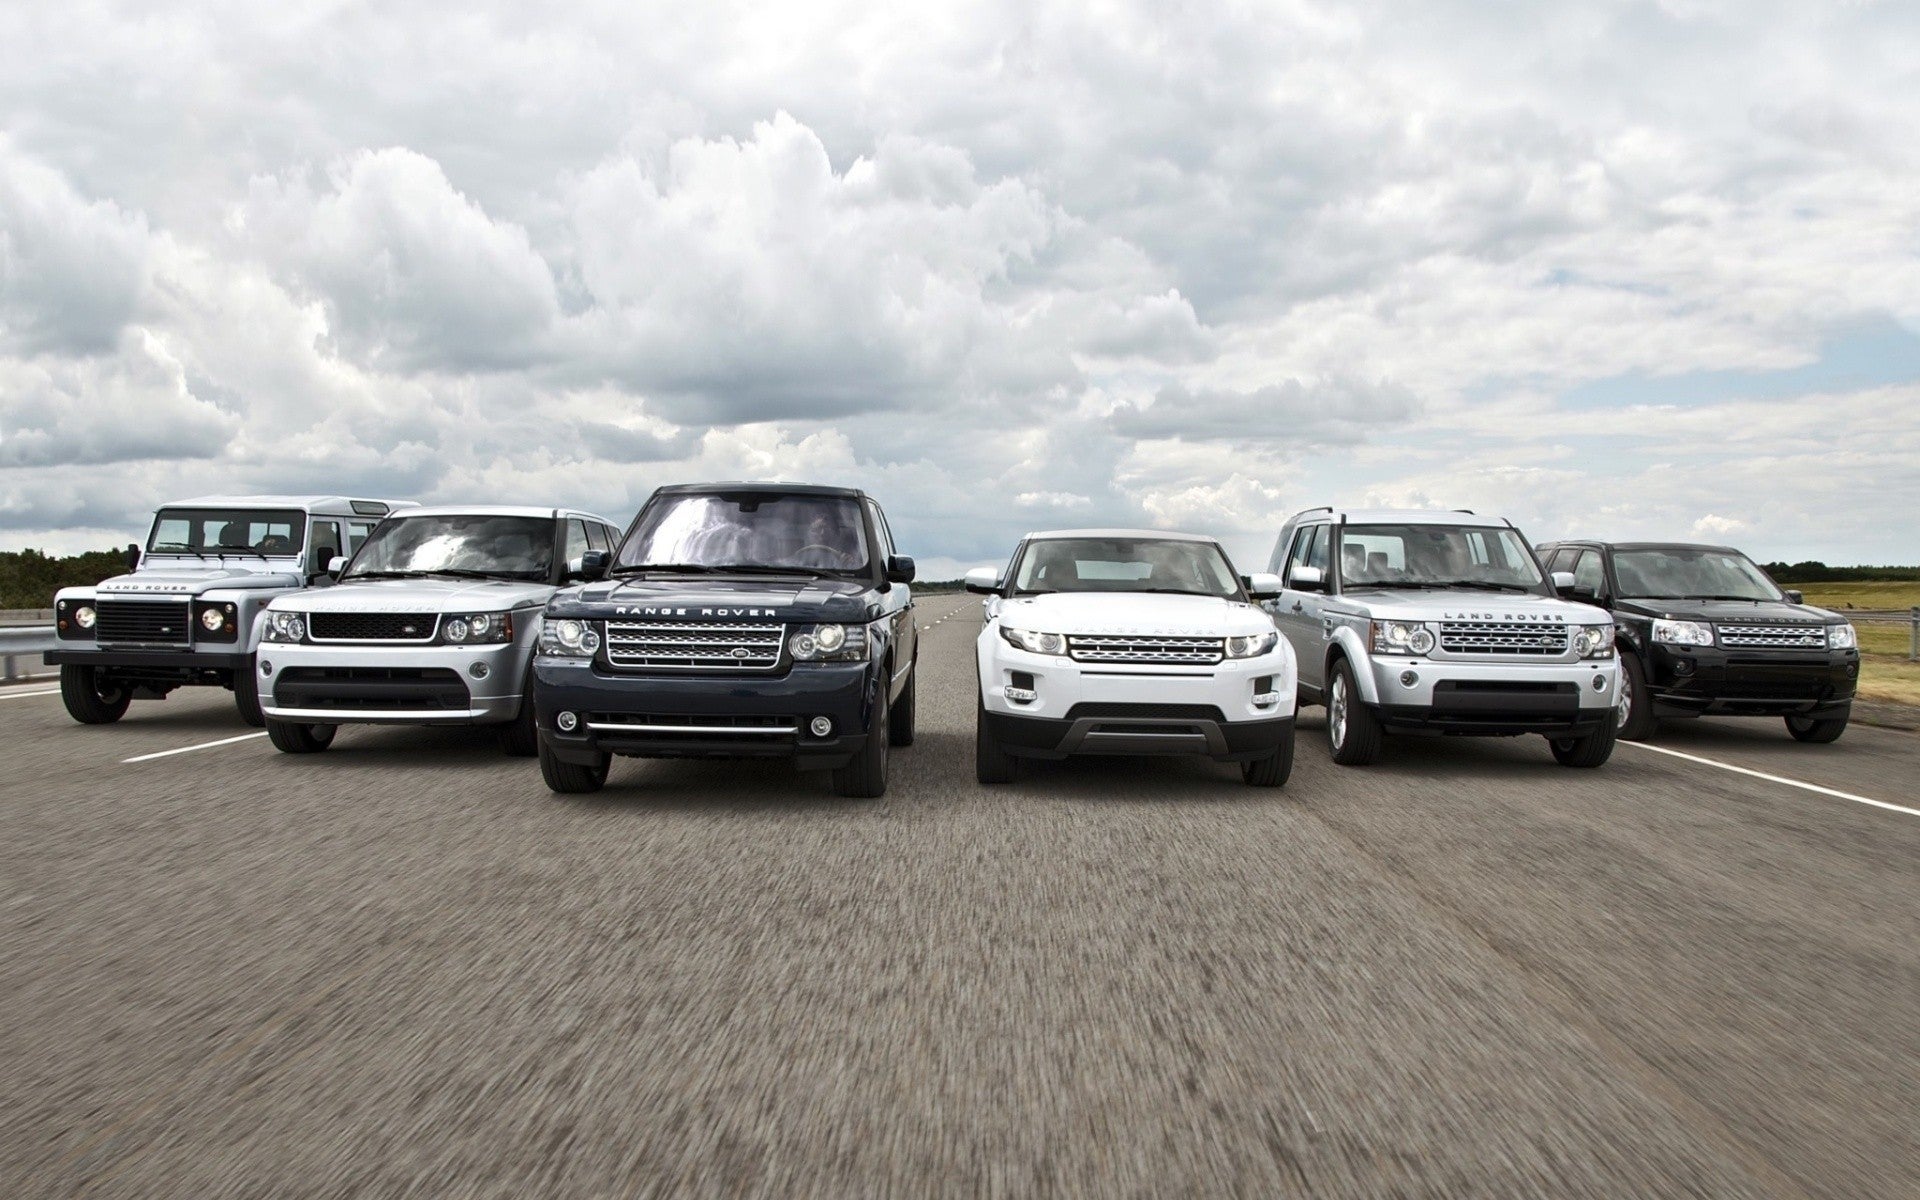 A group of Land Rovers, Santa Monica SUVs' specialty